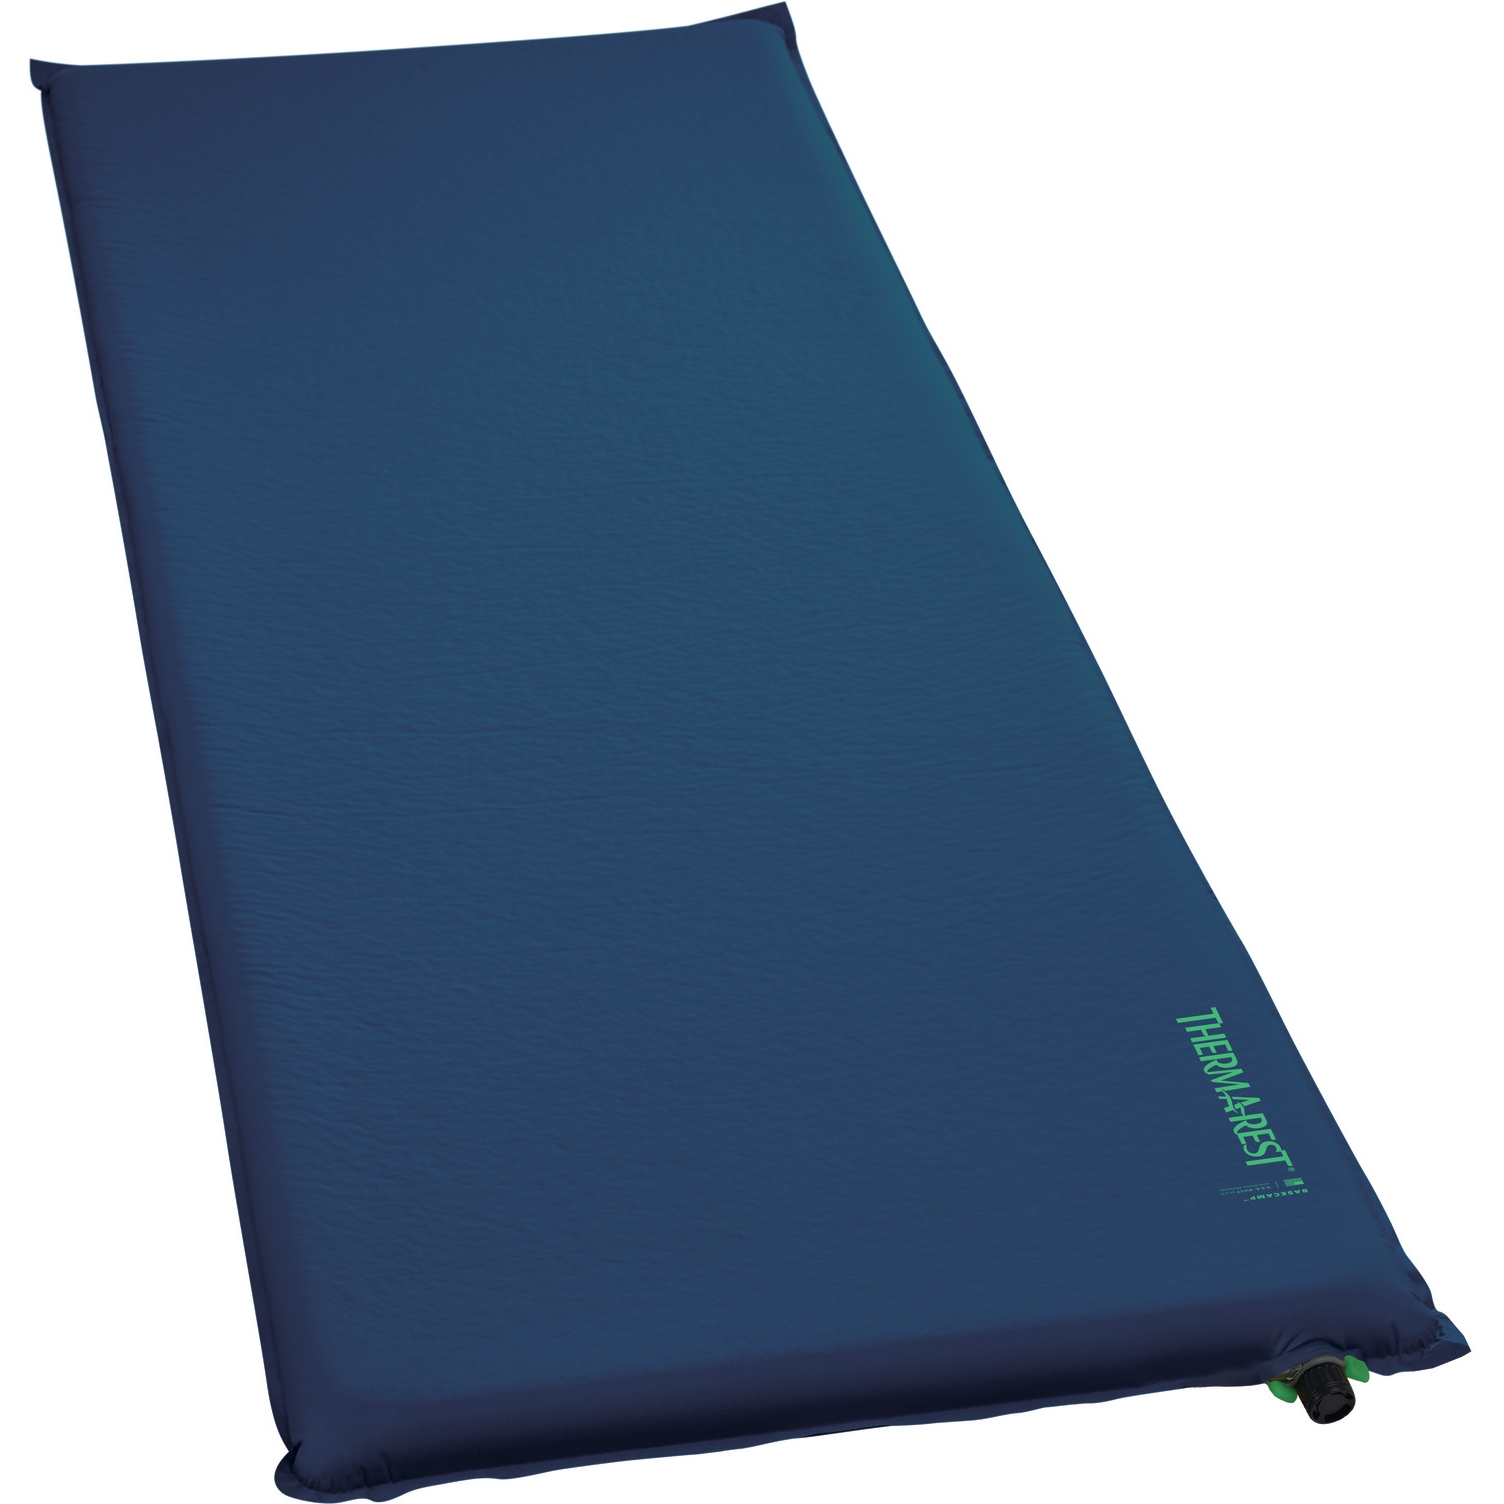 Picture of Therm-a-Rest BaseCamp Mattress Sleeping Pad - XLarge - Poseidon Blue